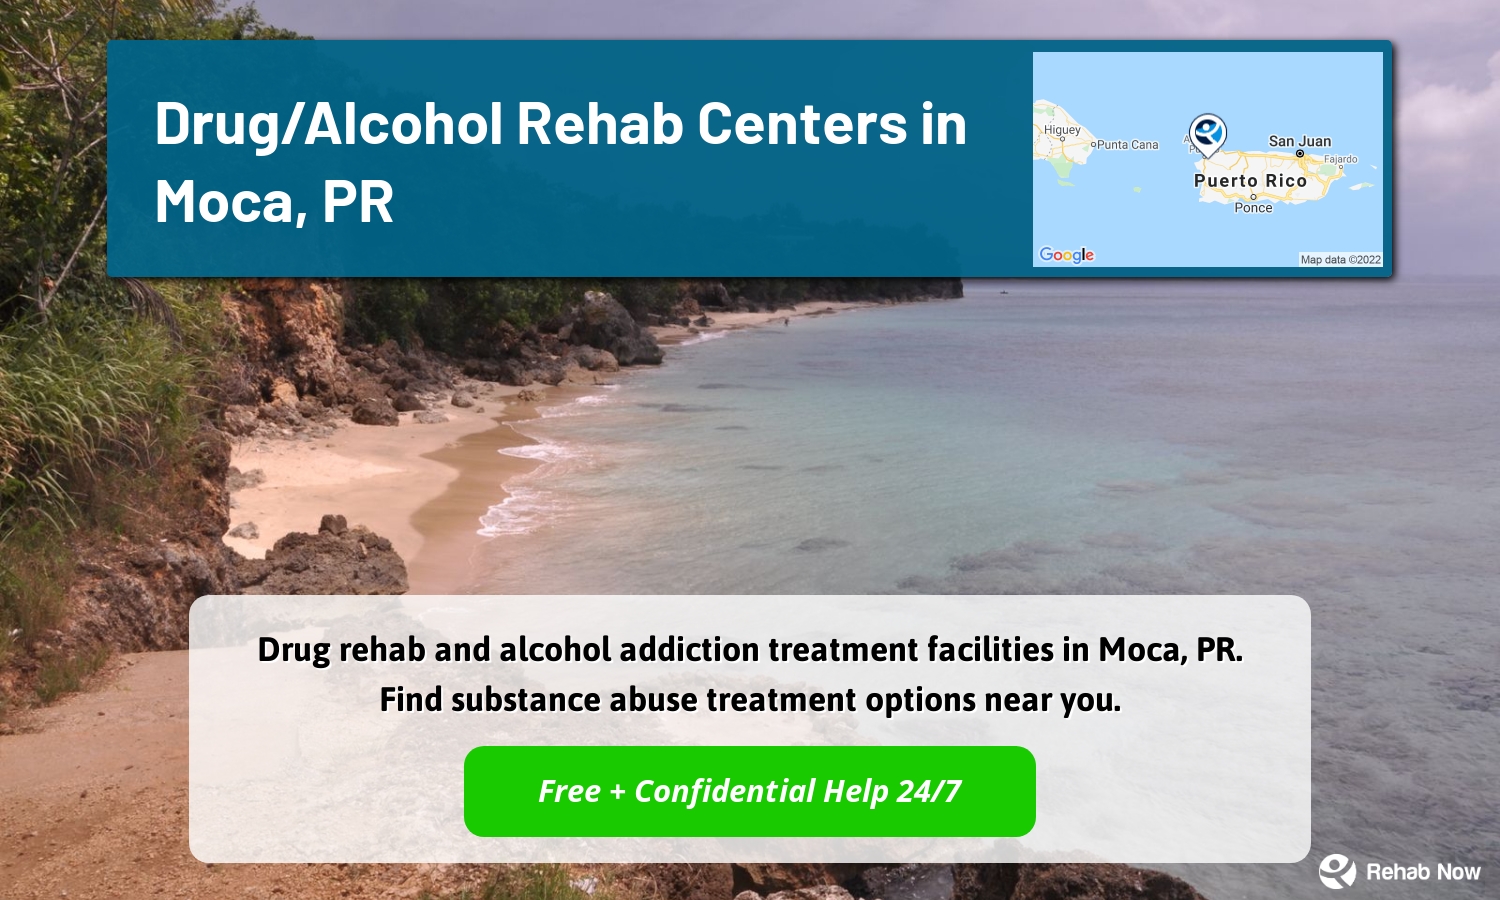 Drug rehab and alcohol addiction treatment facilities in Moca, PR. Find substance abuse treatment options near you.